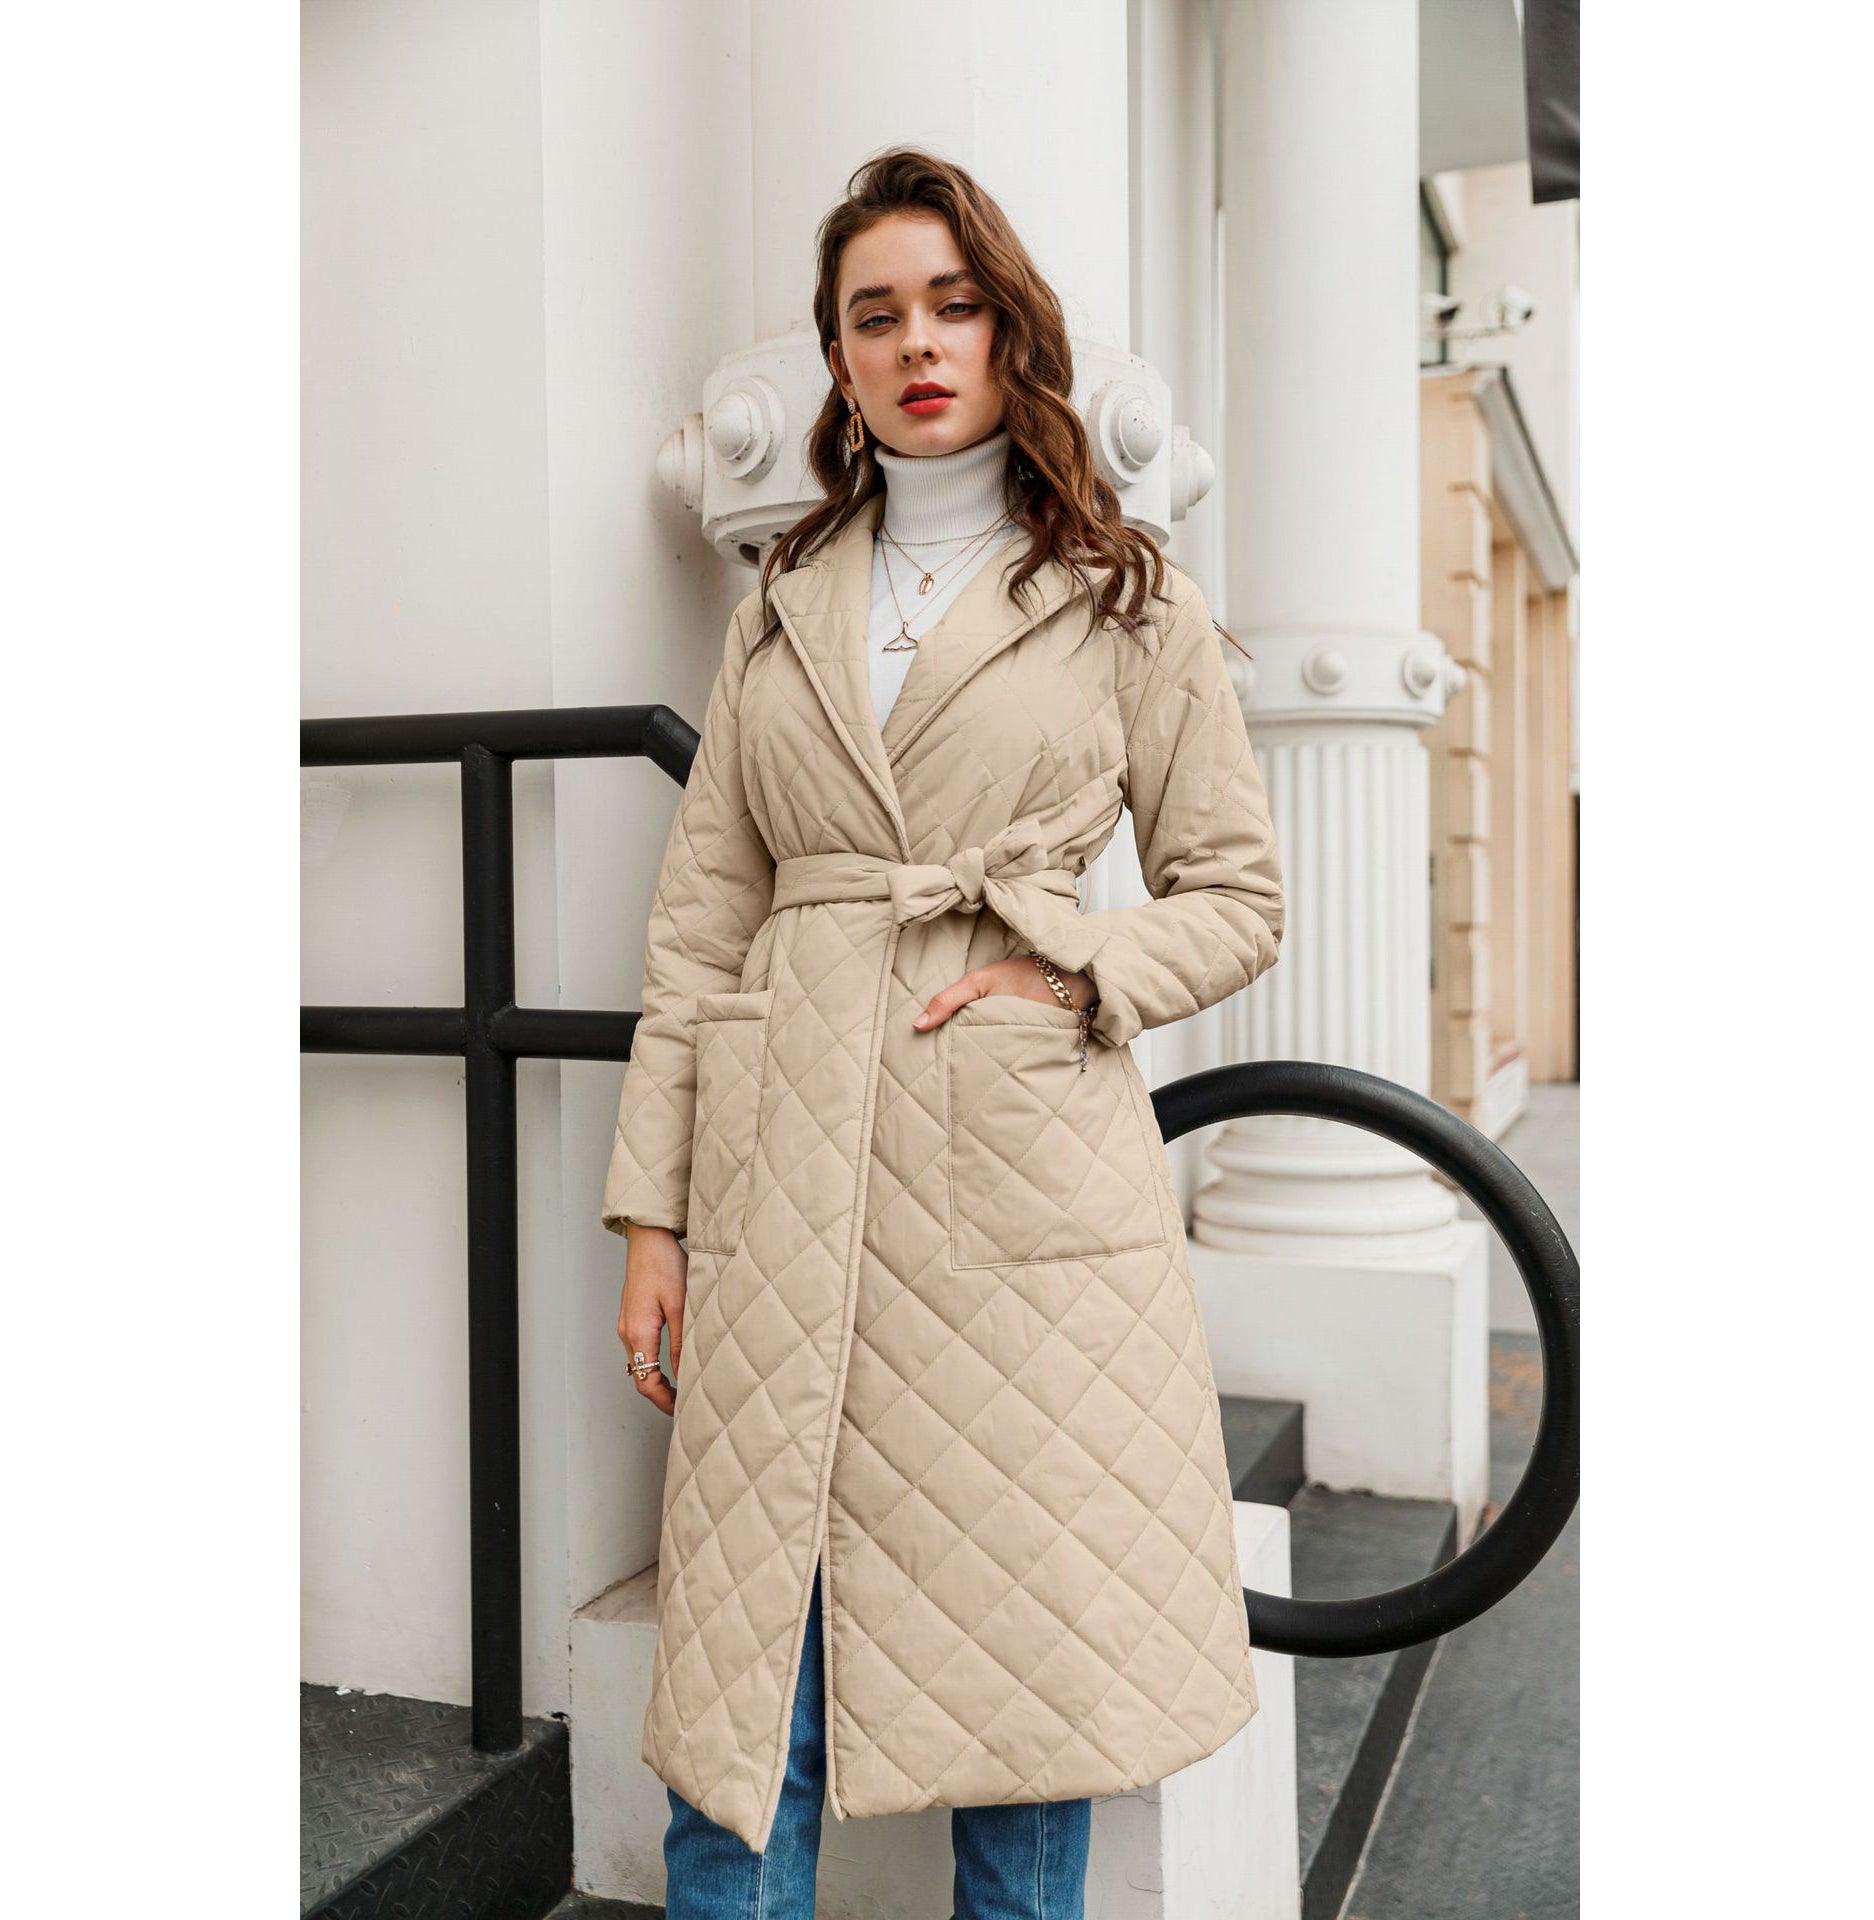 Winter Jackets For Women Plus Size Thicken Puffer Parka Quilted Coat With Tie Waist And Pockets - Estação do Inverno